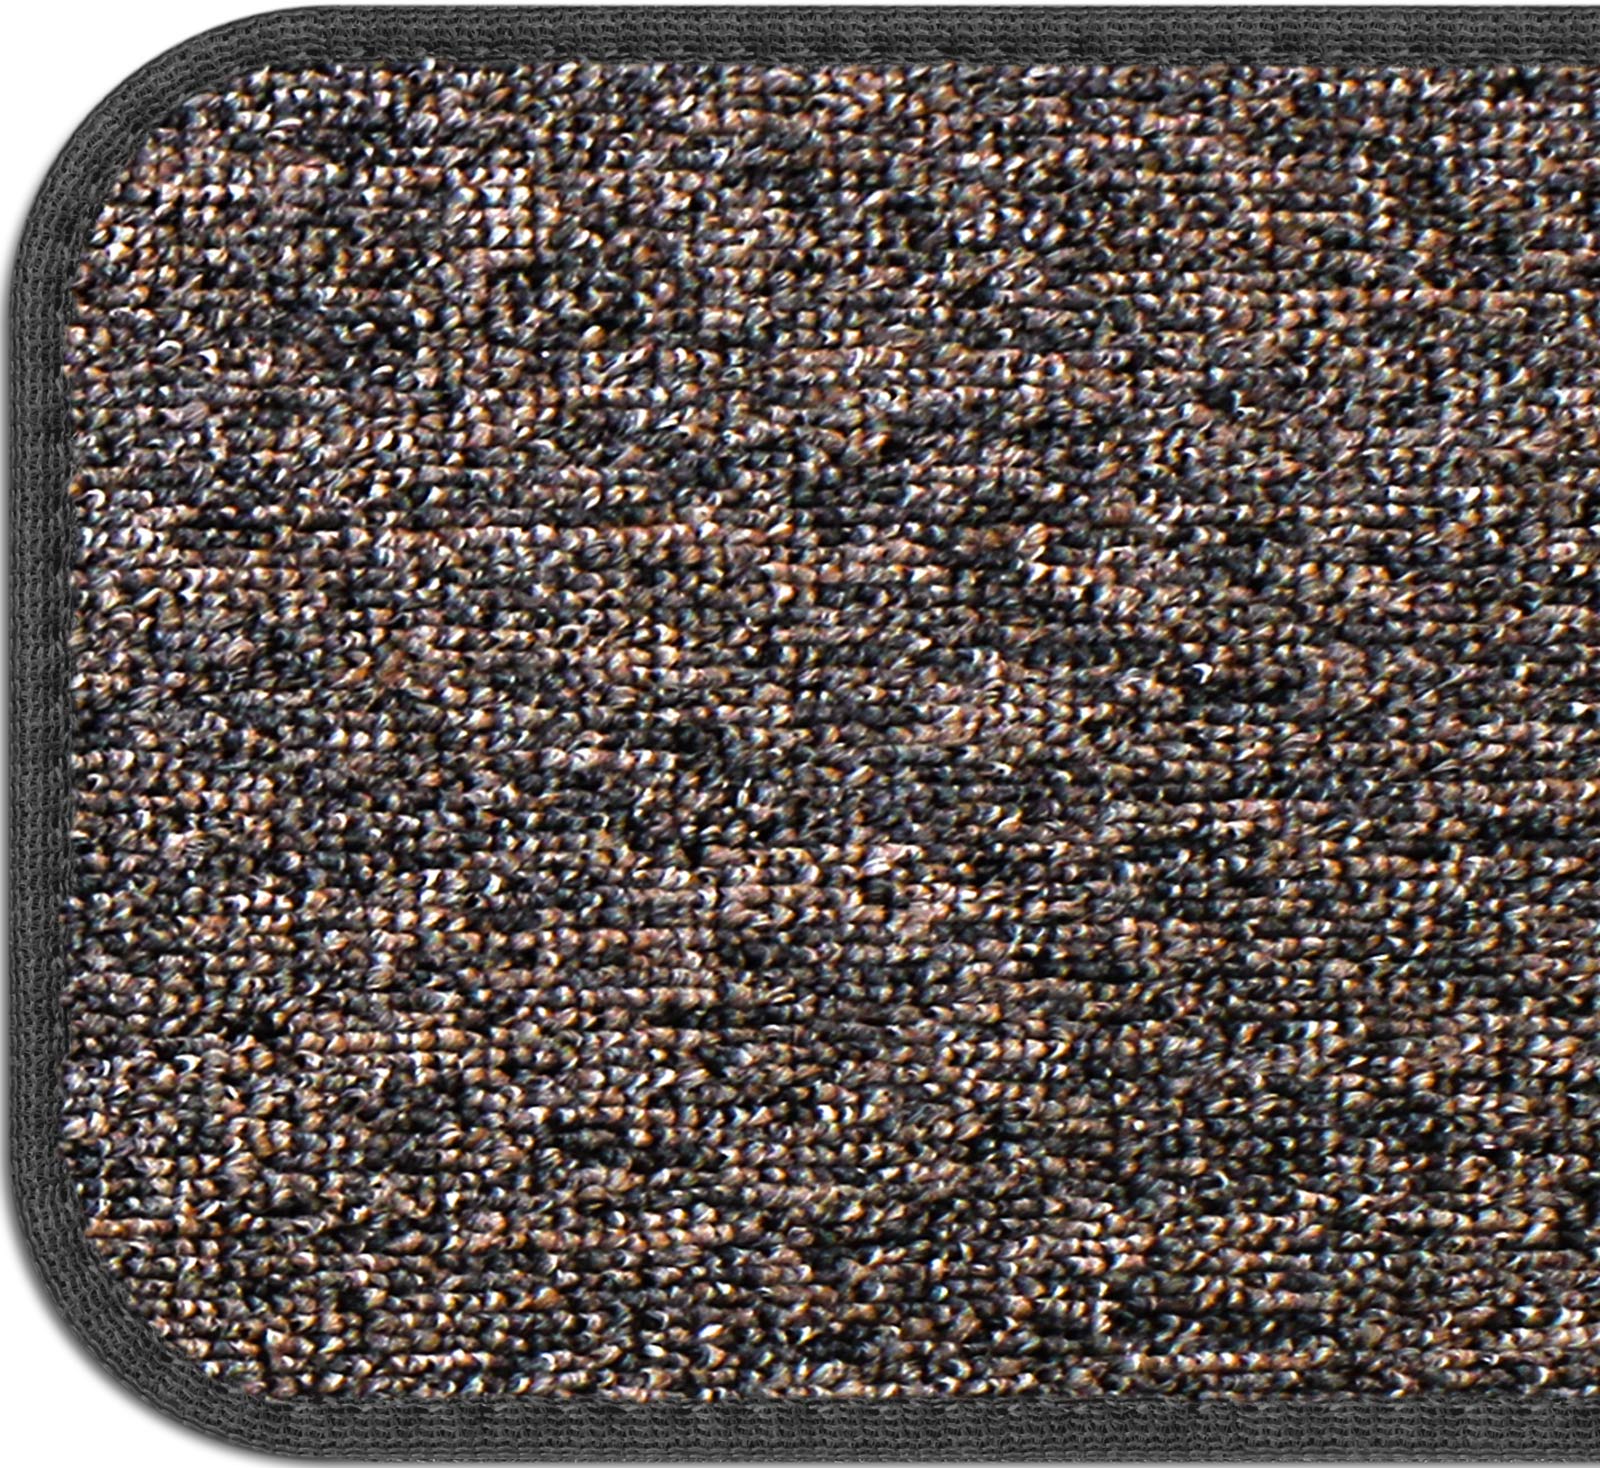 House, Home and More Set of 15 Skid-resistant Carpet Stair Treads - Pebble Gray - 8 In. X 30 In.